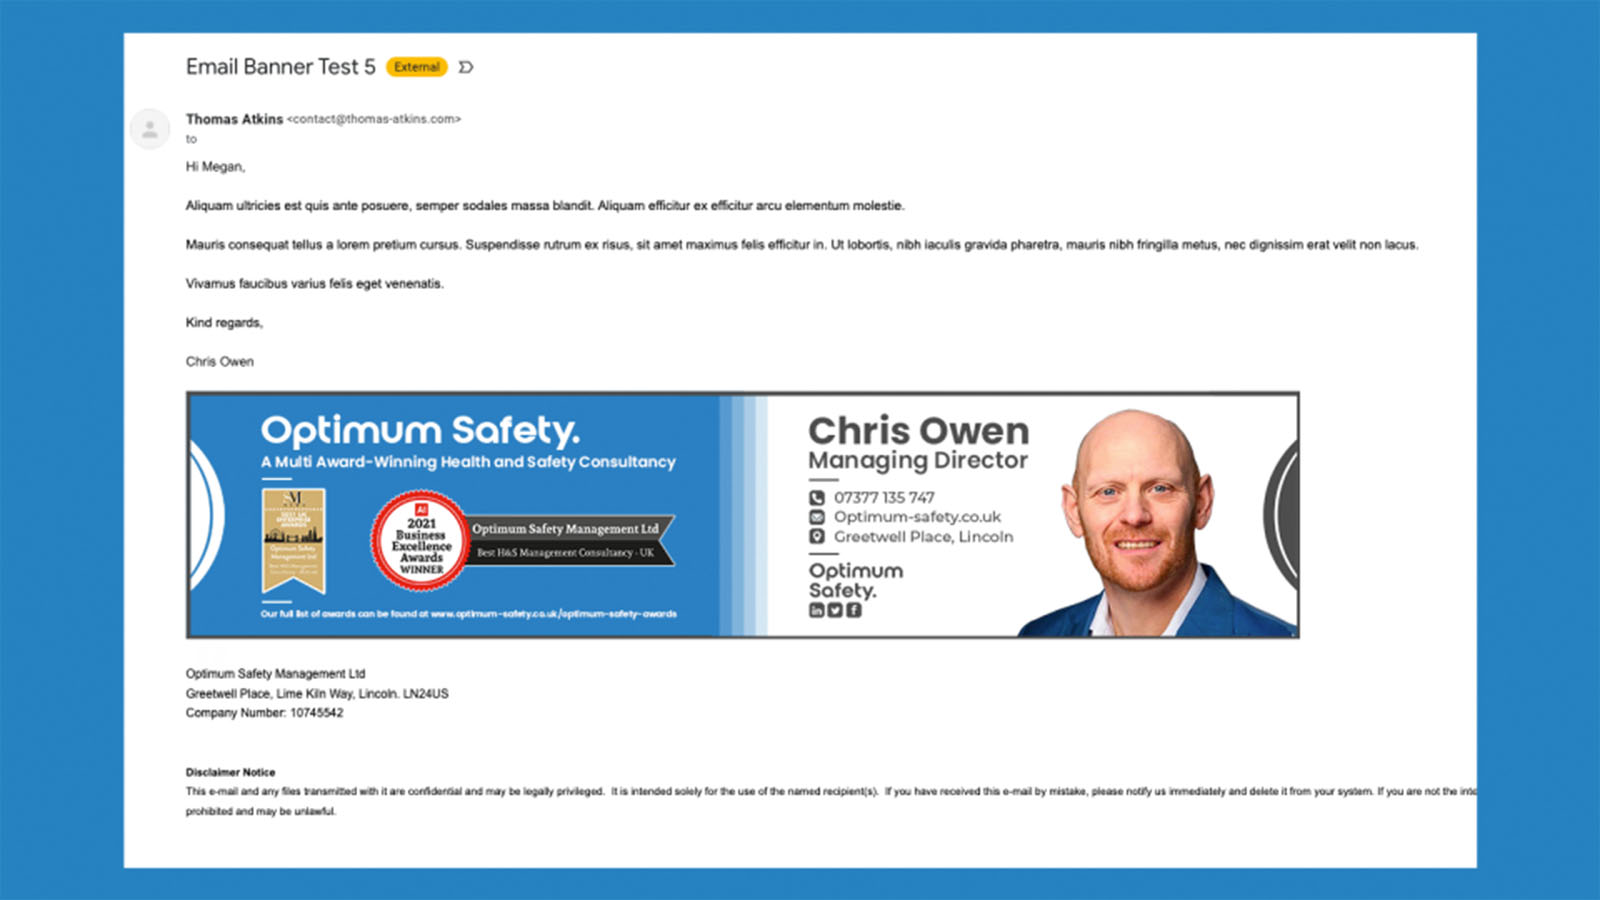 Optimum safety email banner with contact information